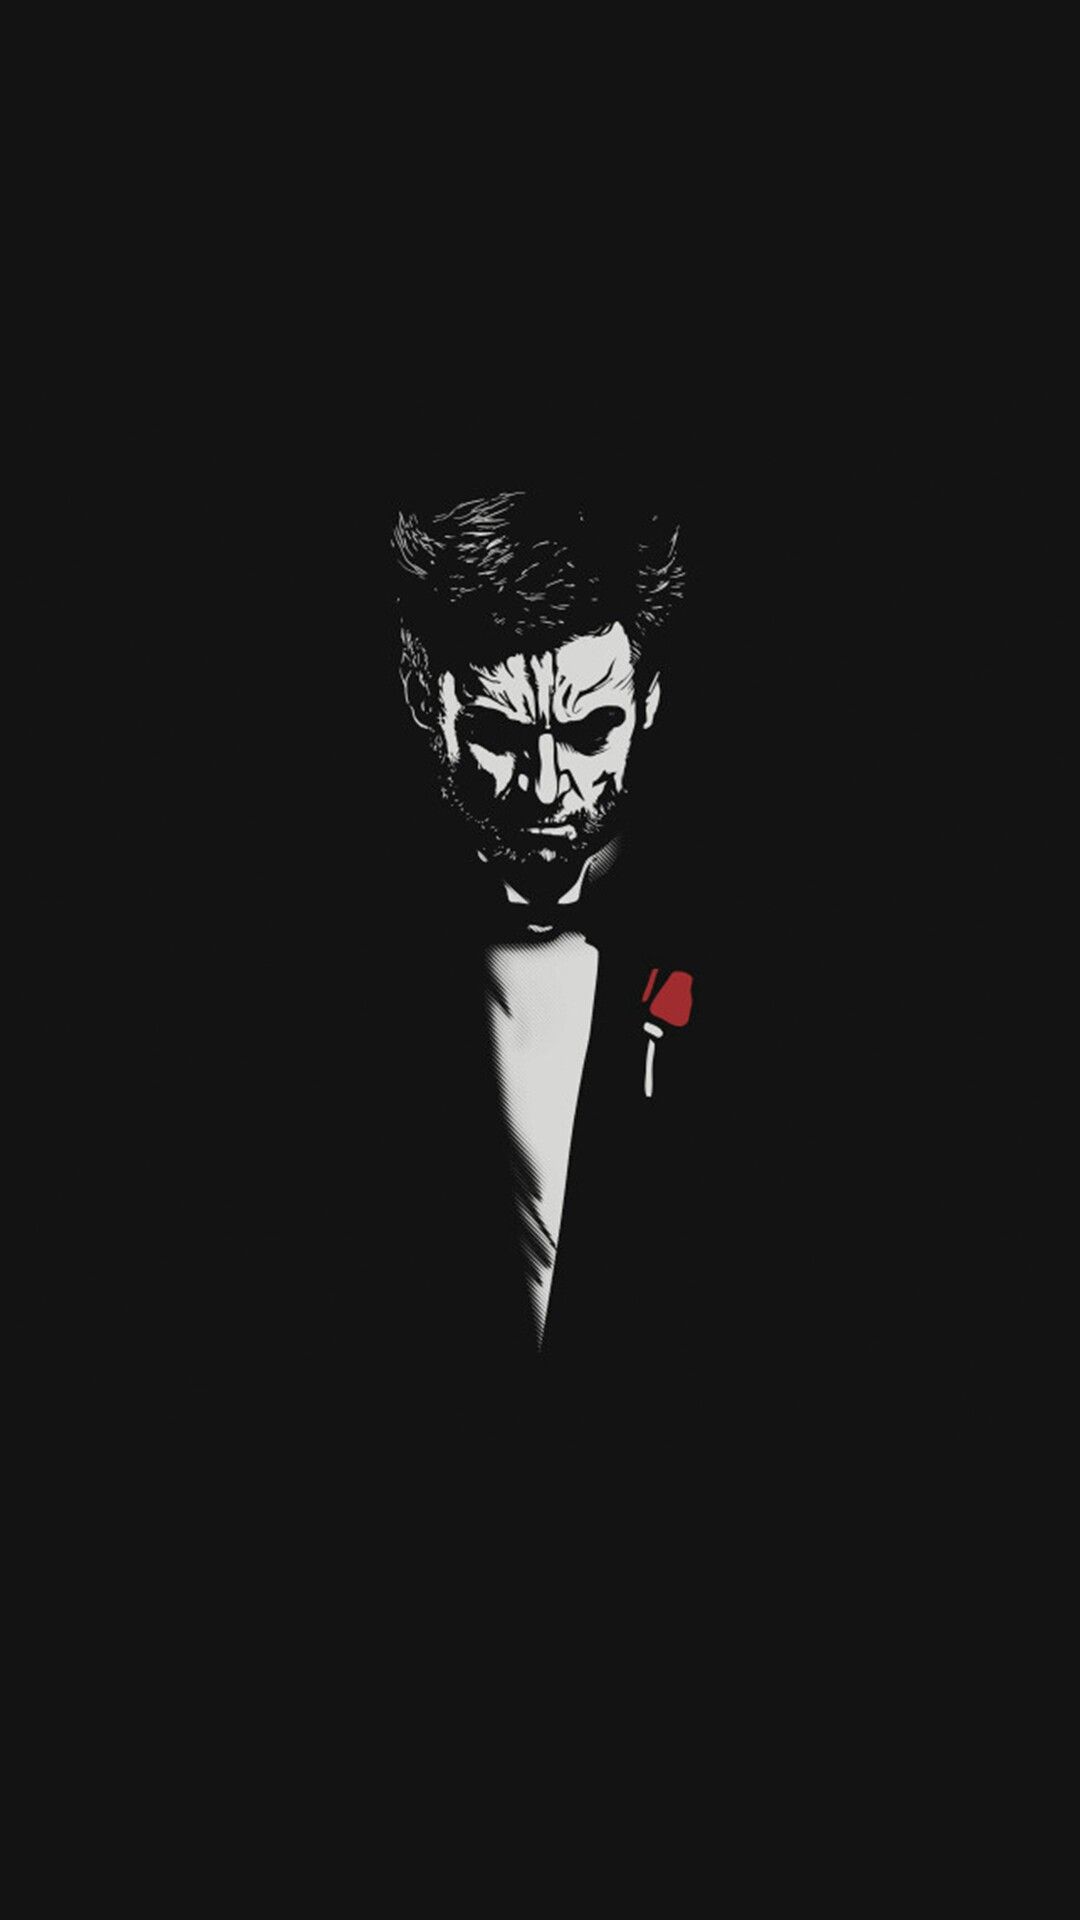 1080x1920 The Wolverine Iphone Wallpaper Iphone Wallpaper